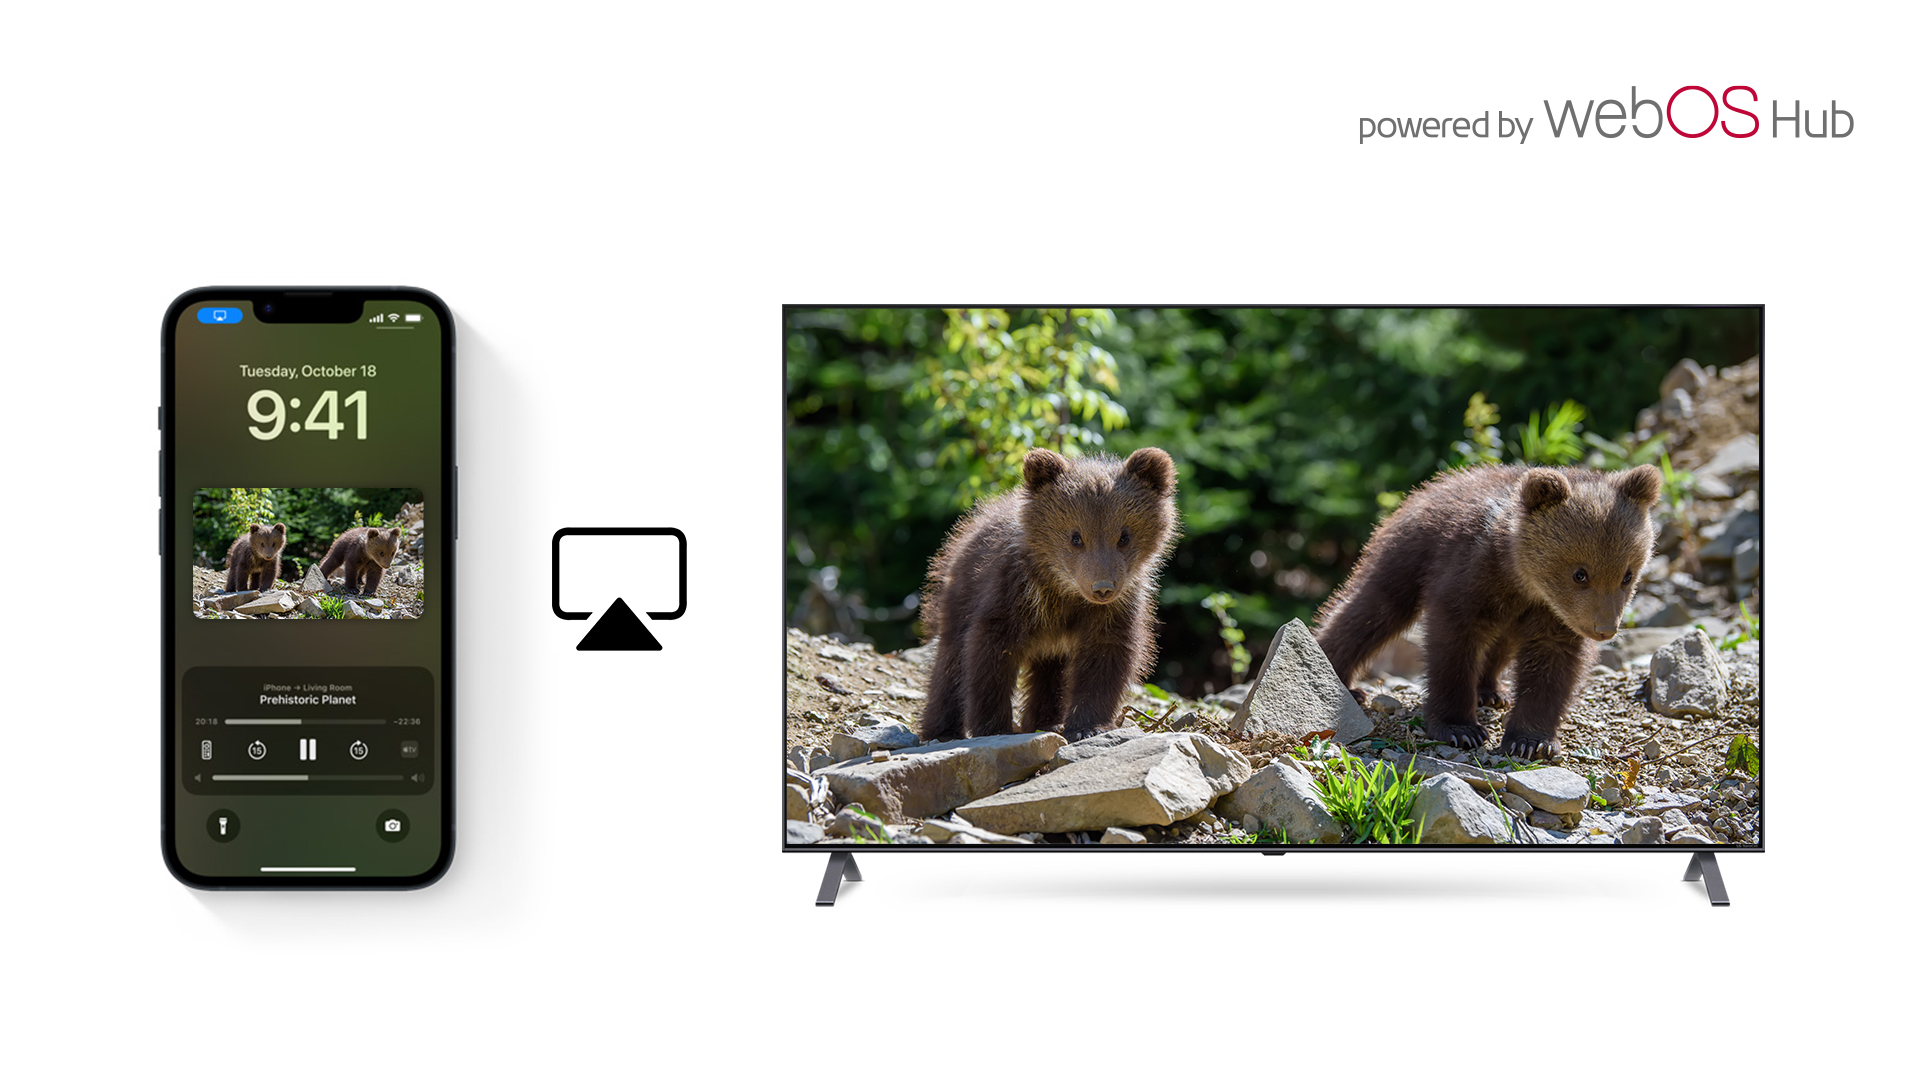 An image of an iPhone using Airplay to mirror a picture of two bear cubs in the wild to an LG Smart TV powered by webOS Hub 2.0